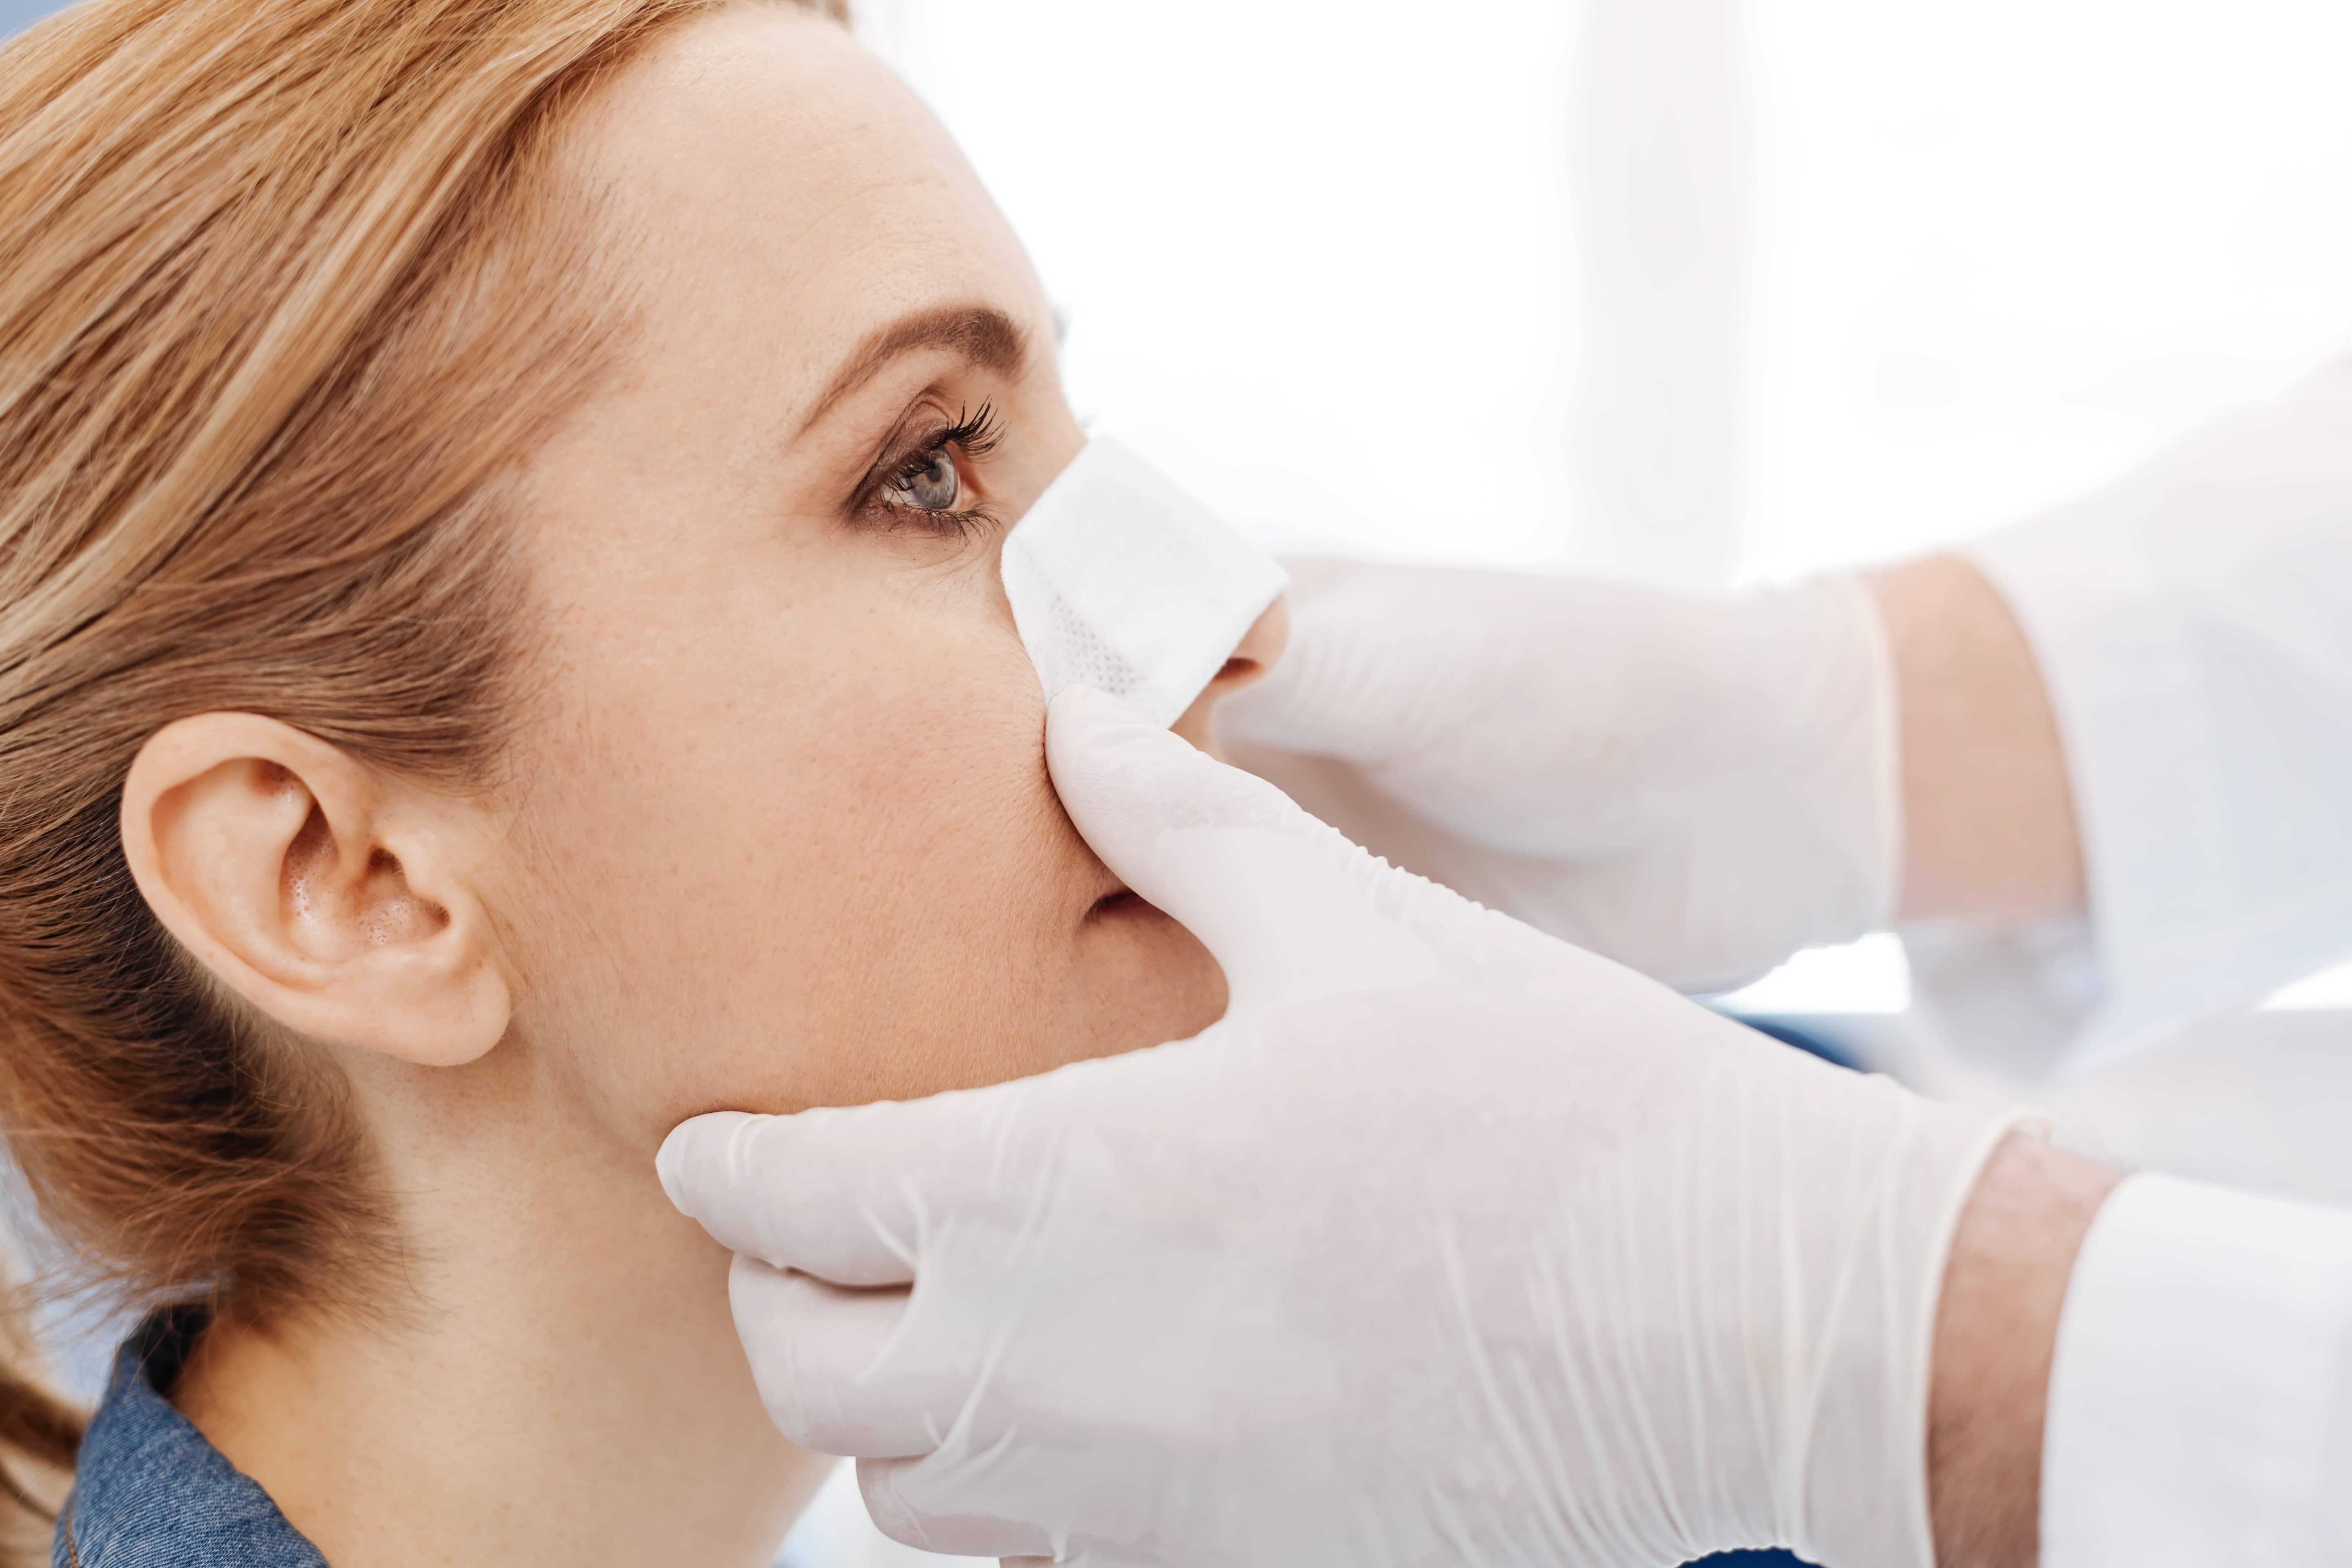 how to take care of your nose after rhinoplasty